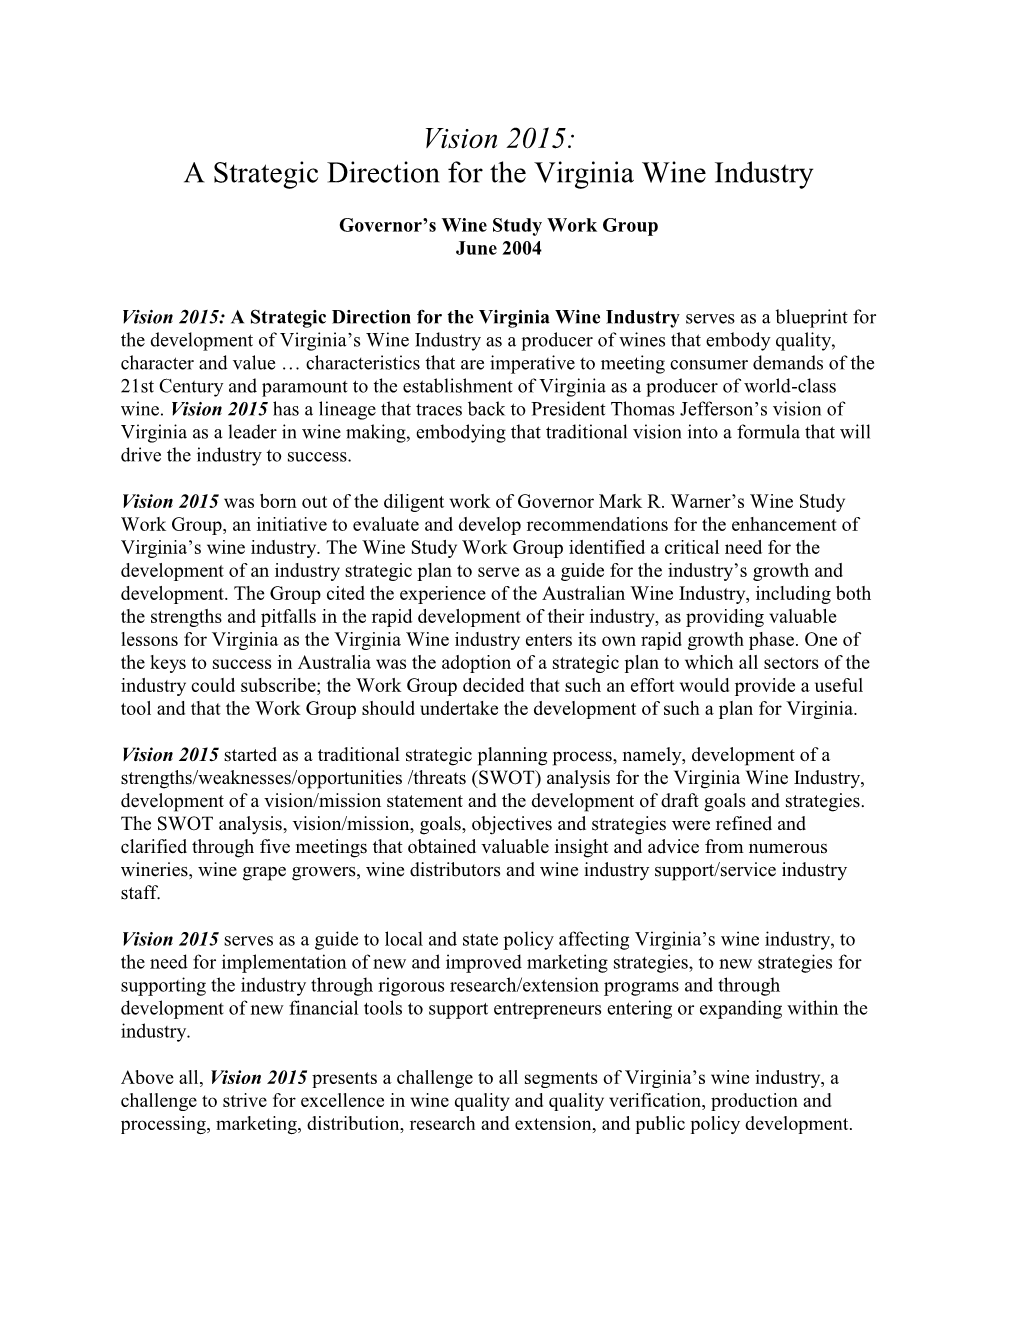 Vision 2015: a Strategic Direction for the Virginia Wine Industry